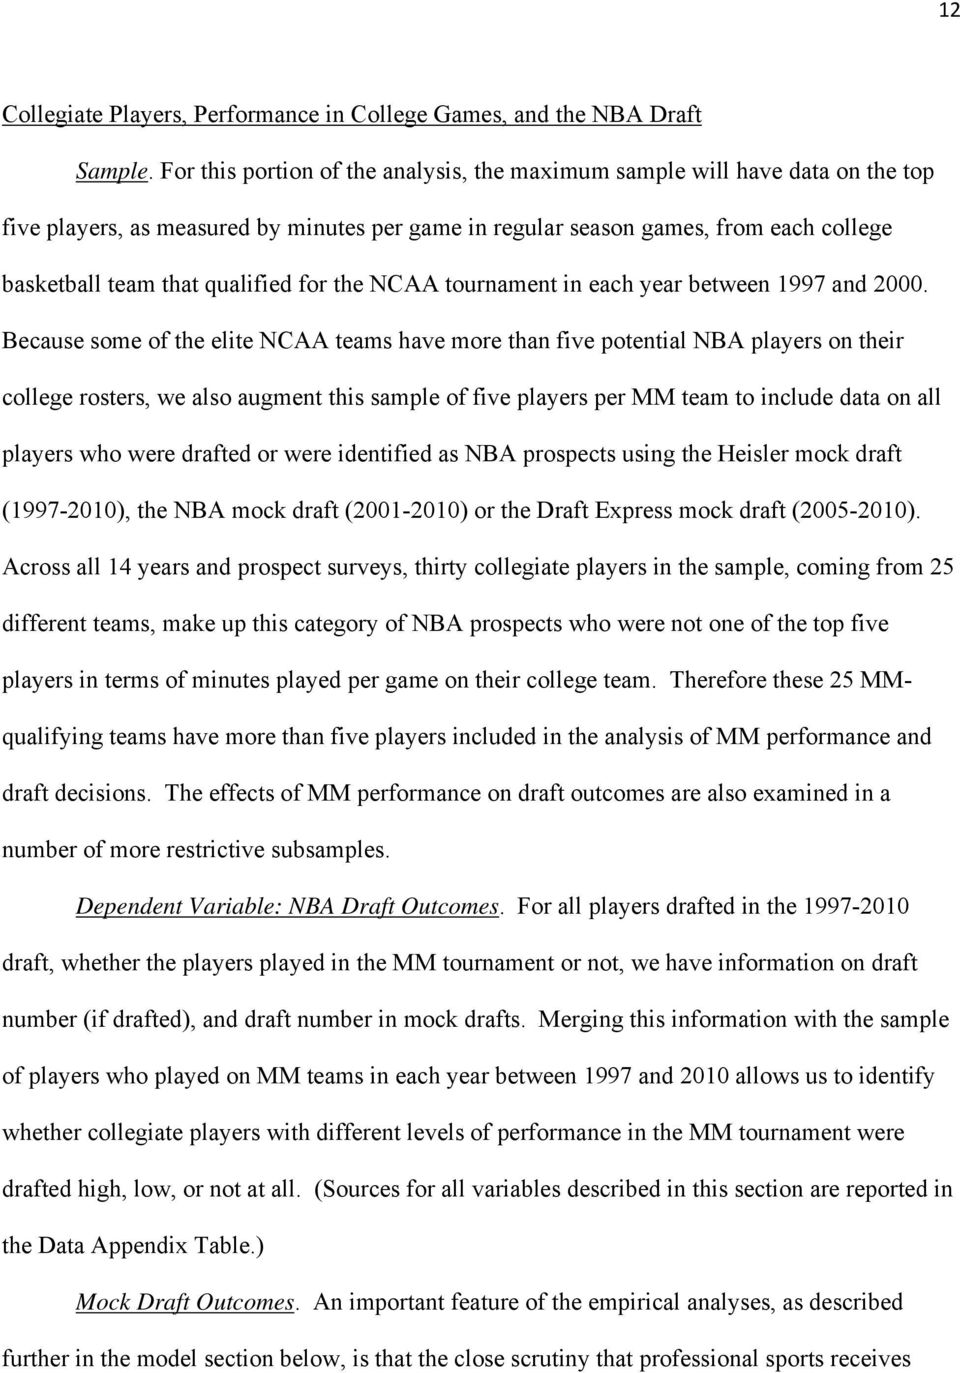 for the NCAA tournament in each year between 1997 and 2000.